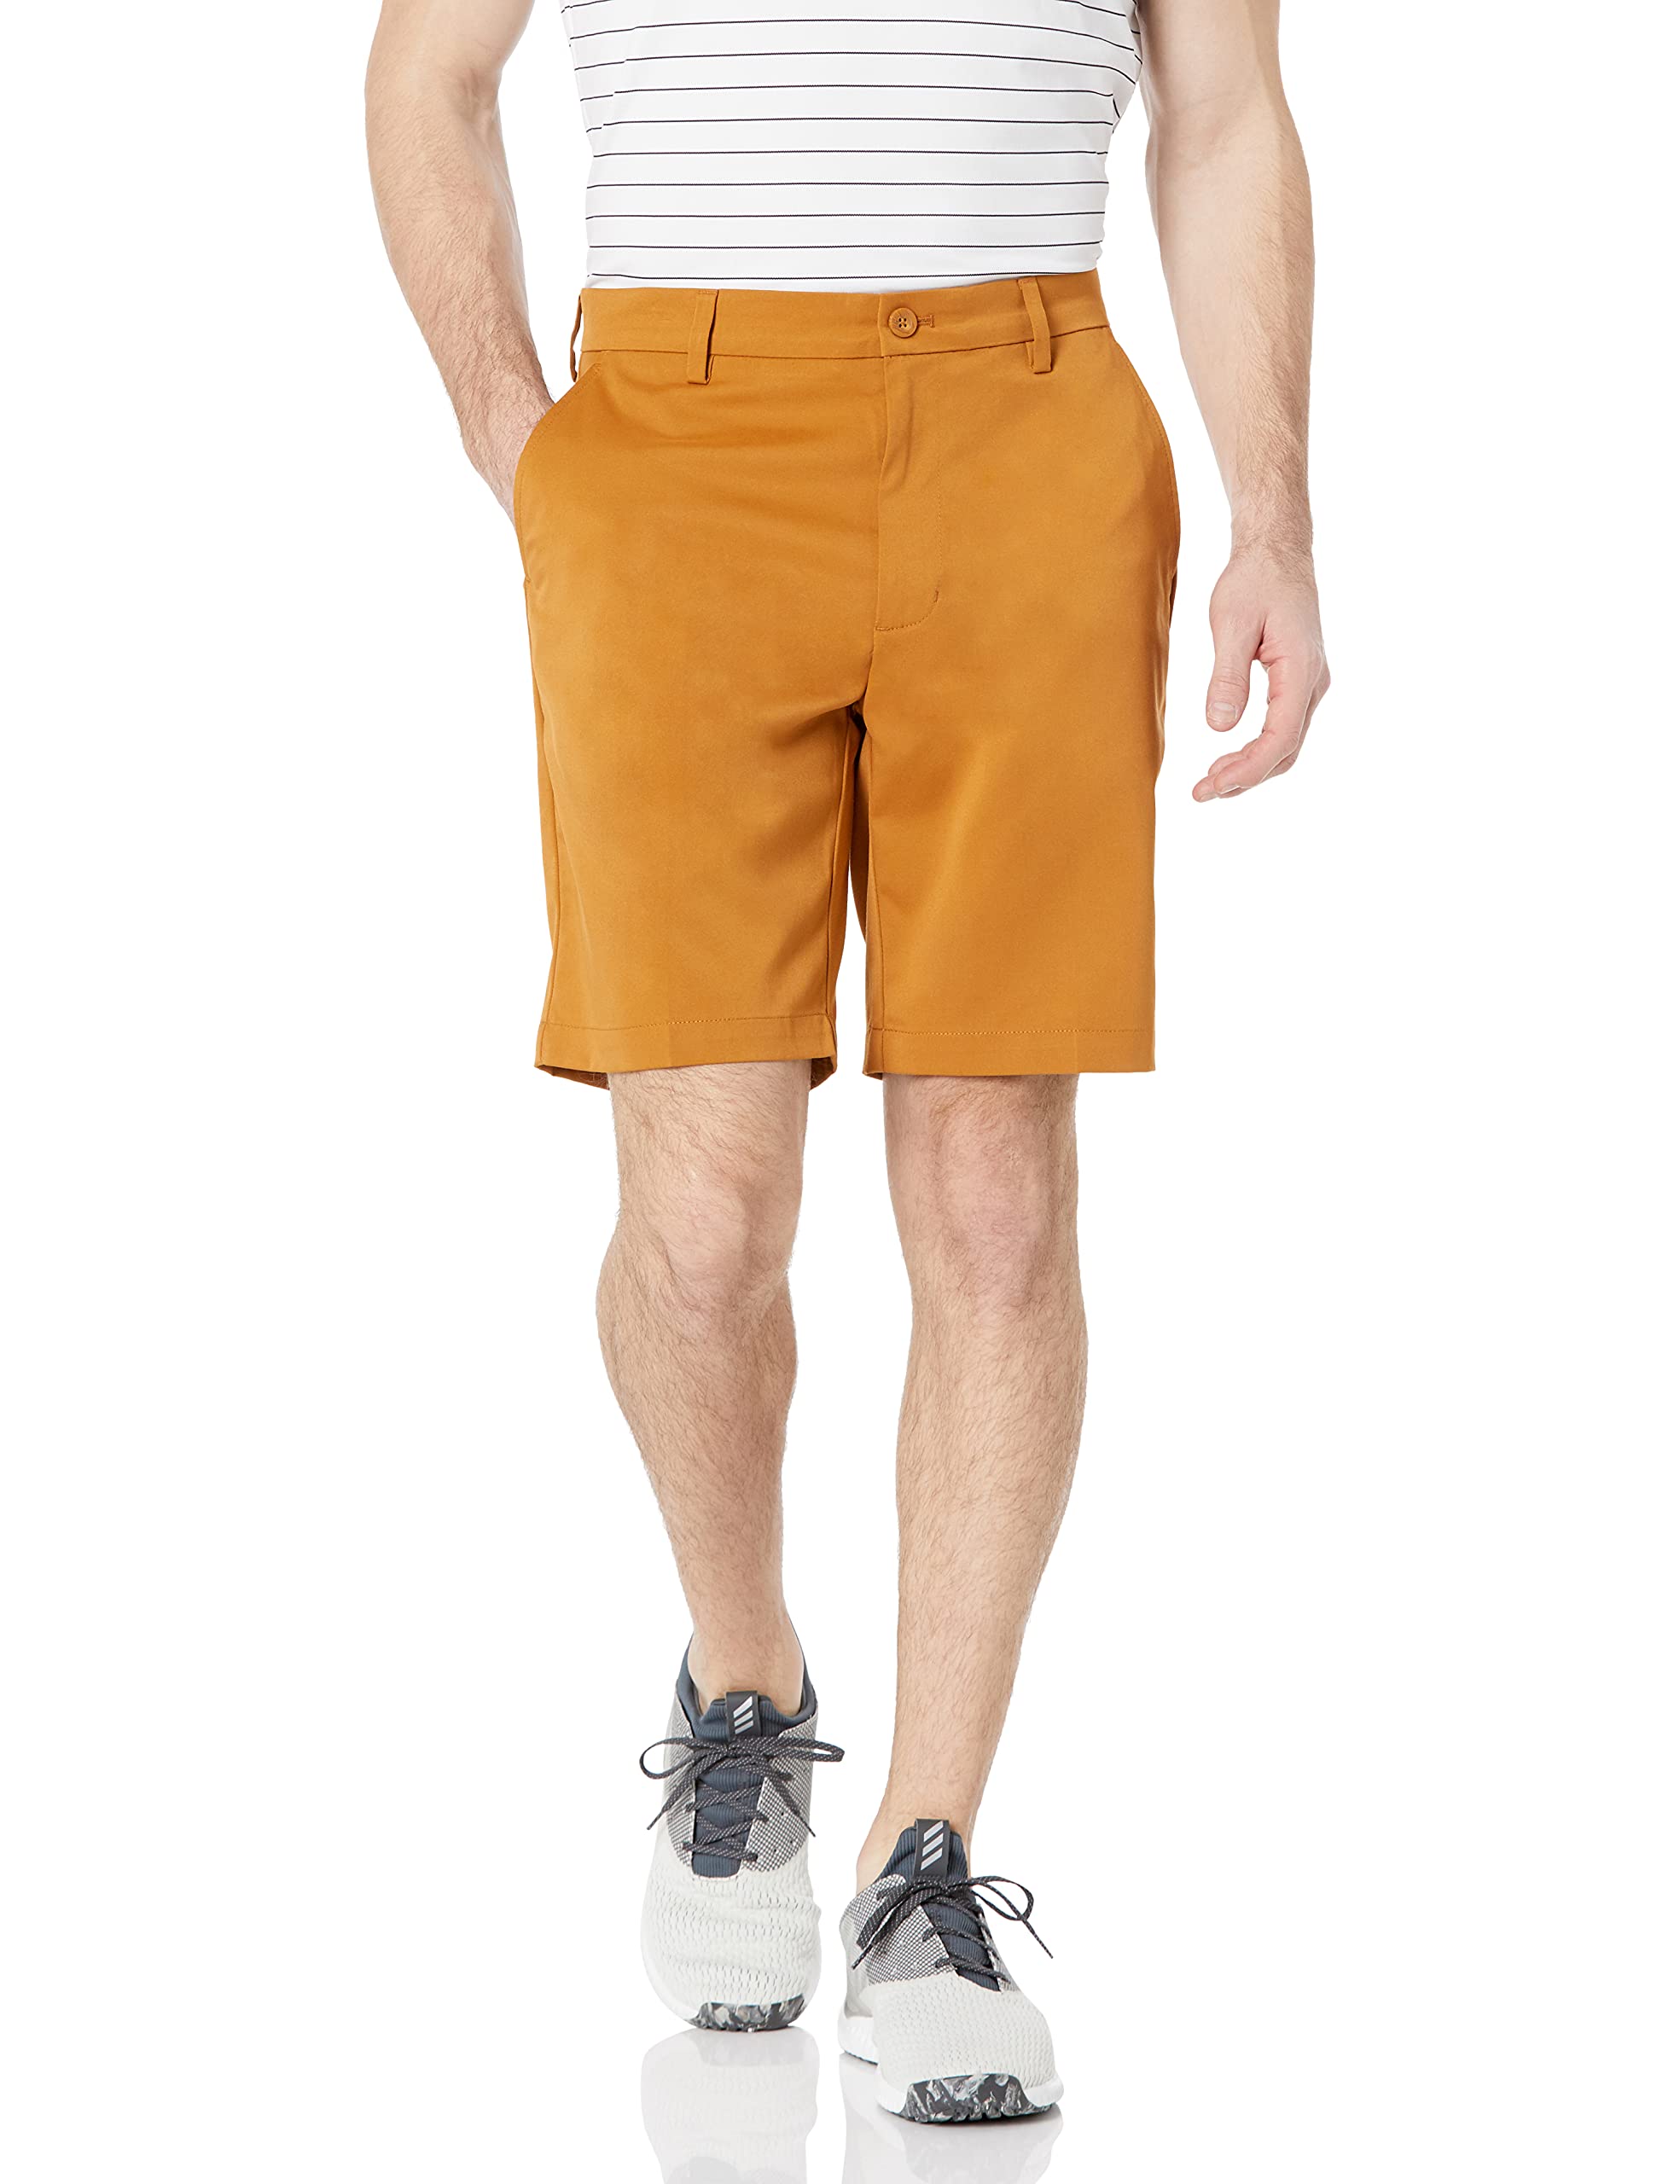 Amazon Essentials Men's Classic-Fit Stretch Golf Short (Apricot Orange or White) $8.30+ Free Shipping w/ Prime or on $35+